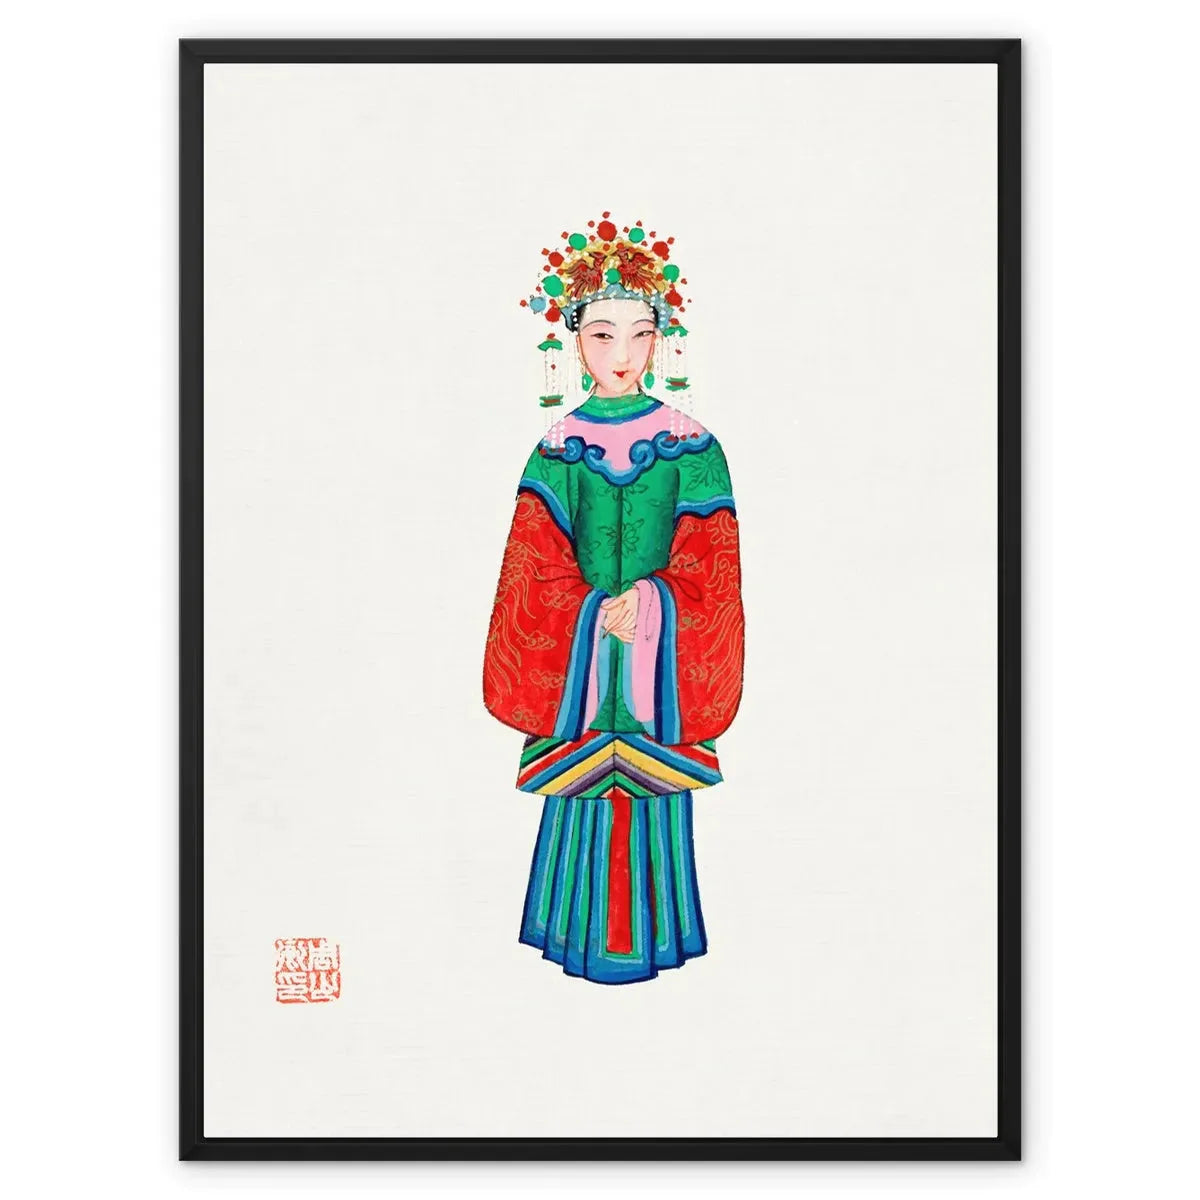 Chinese Imperial Princess Framed Canvas - 24’x32’ / Black Frame / White Wrap - Posters Prints & Visual Artwork